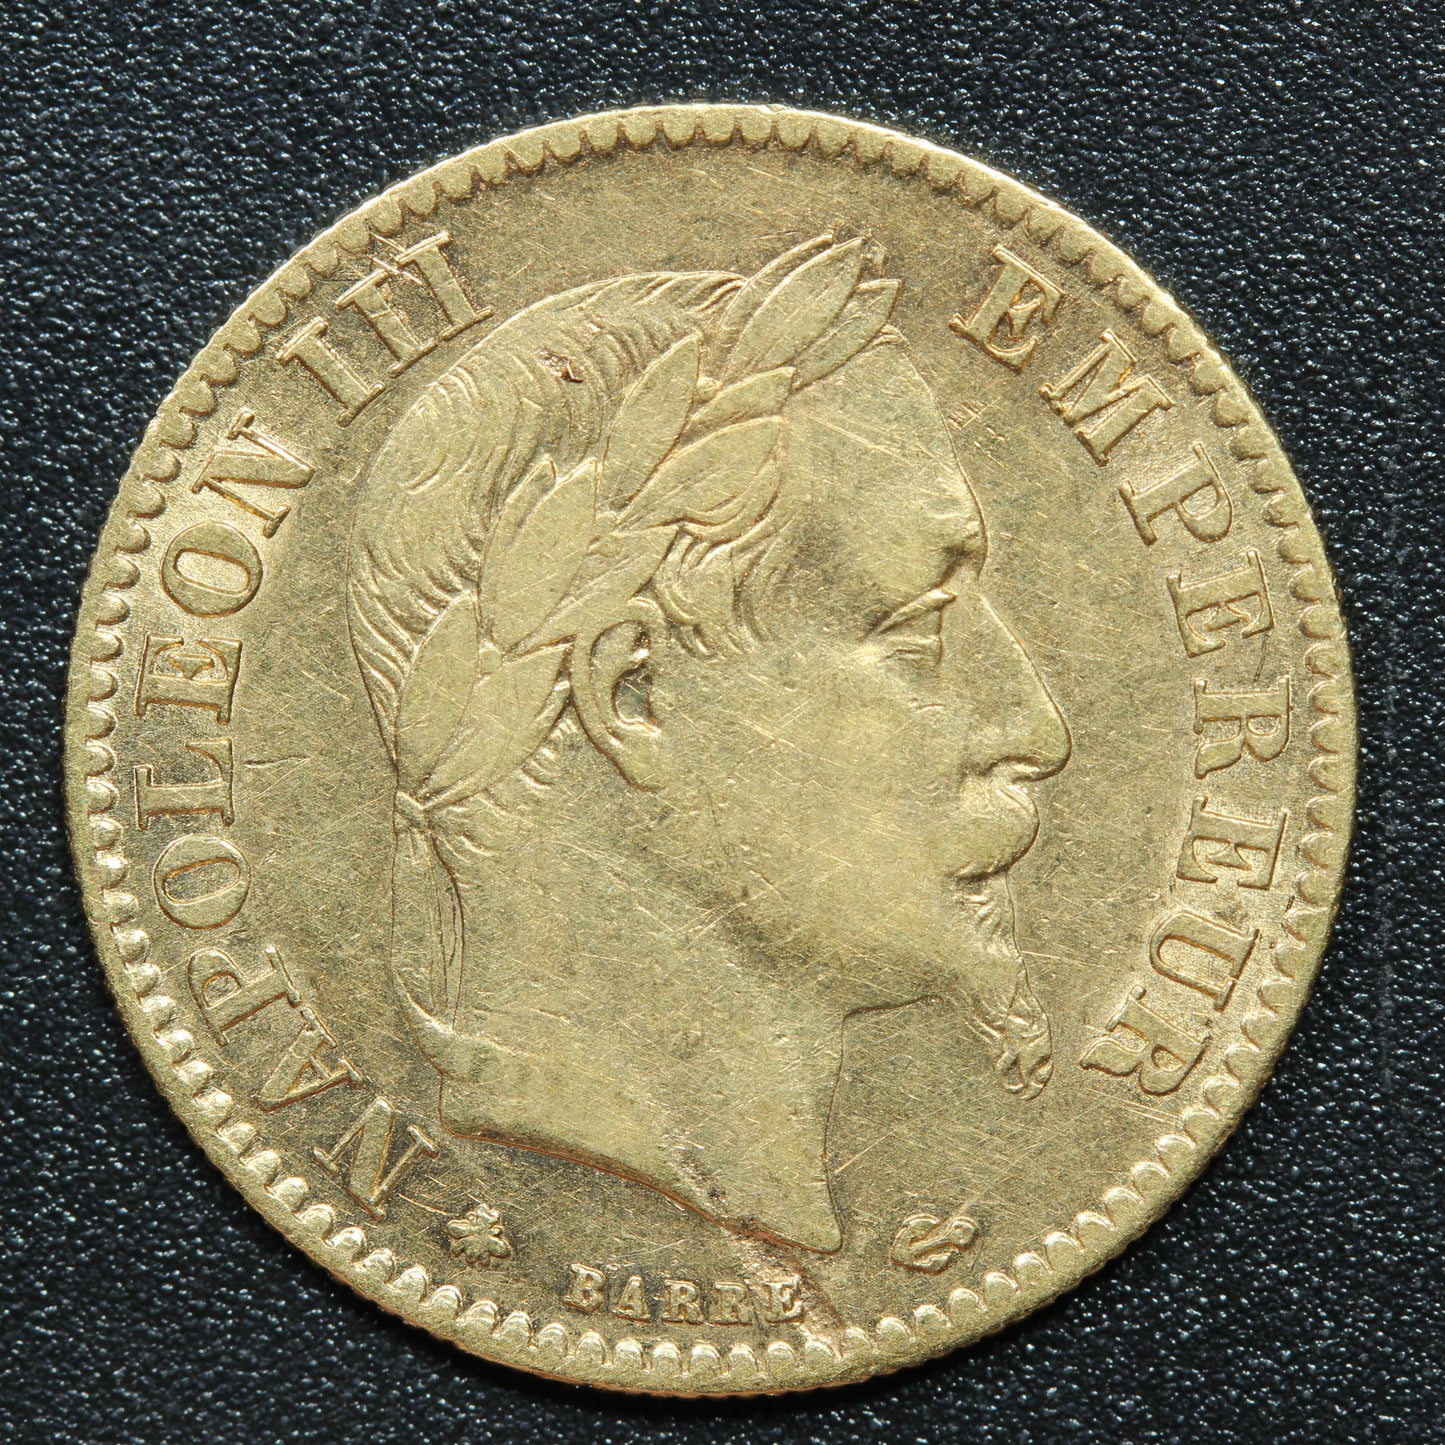 1864 A French Gold 10 Francs NAPOLEON III - KM#800.1